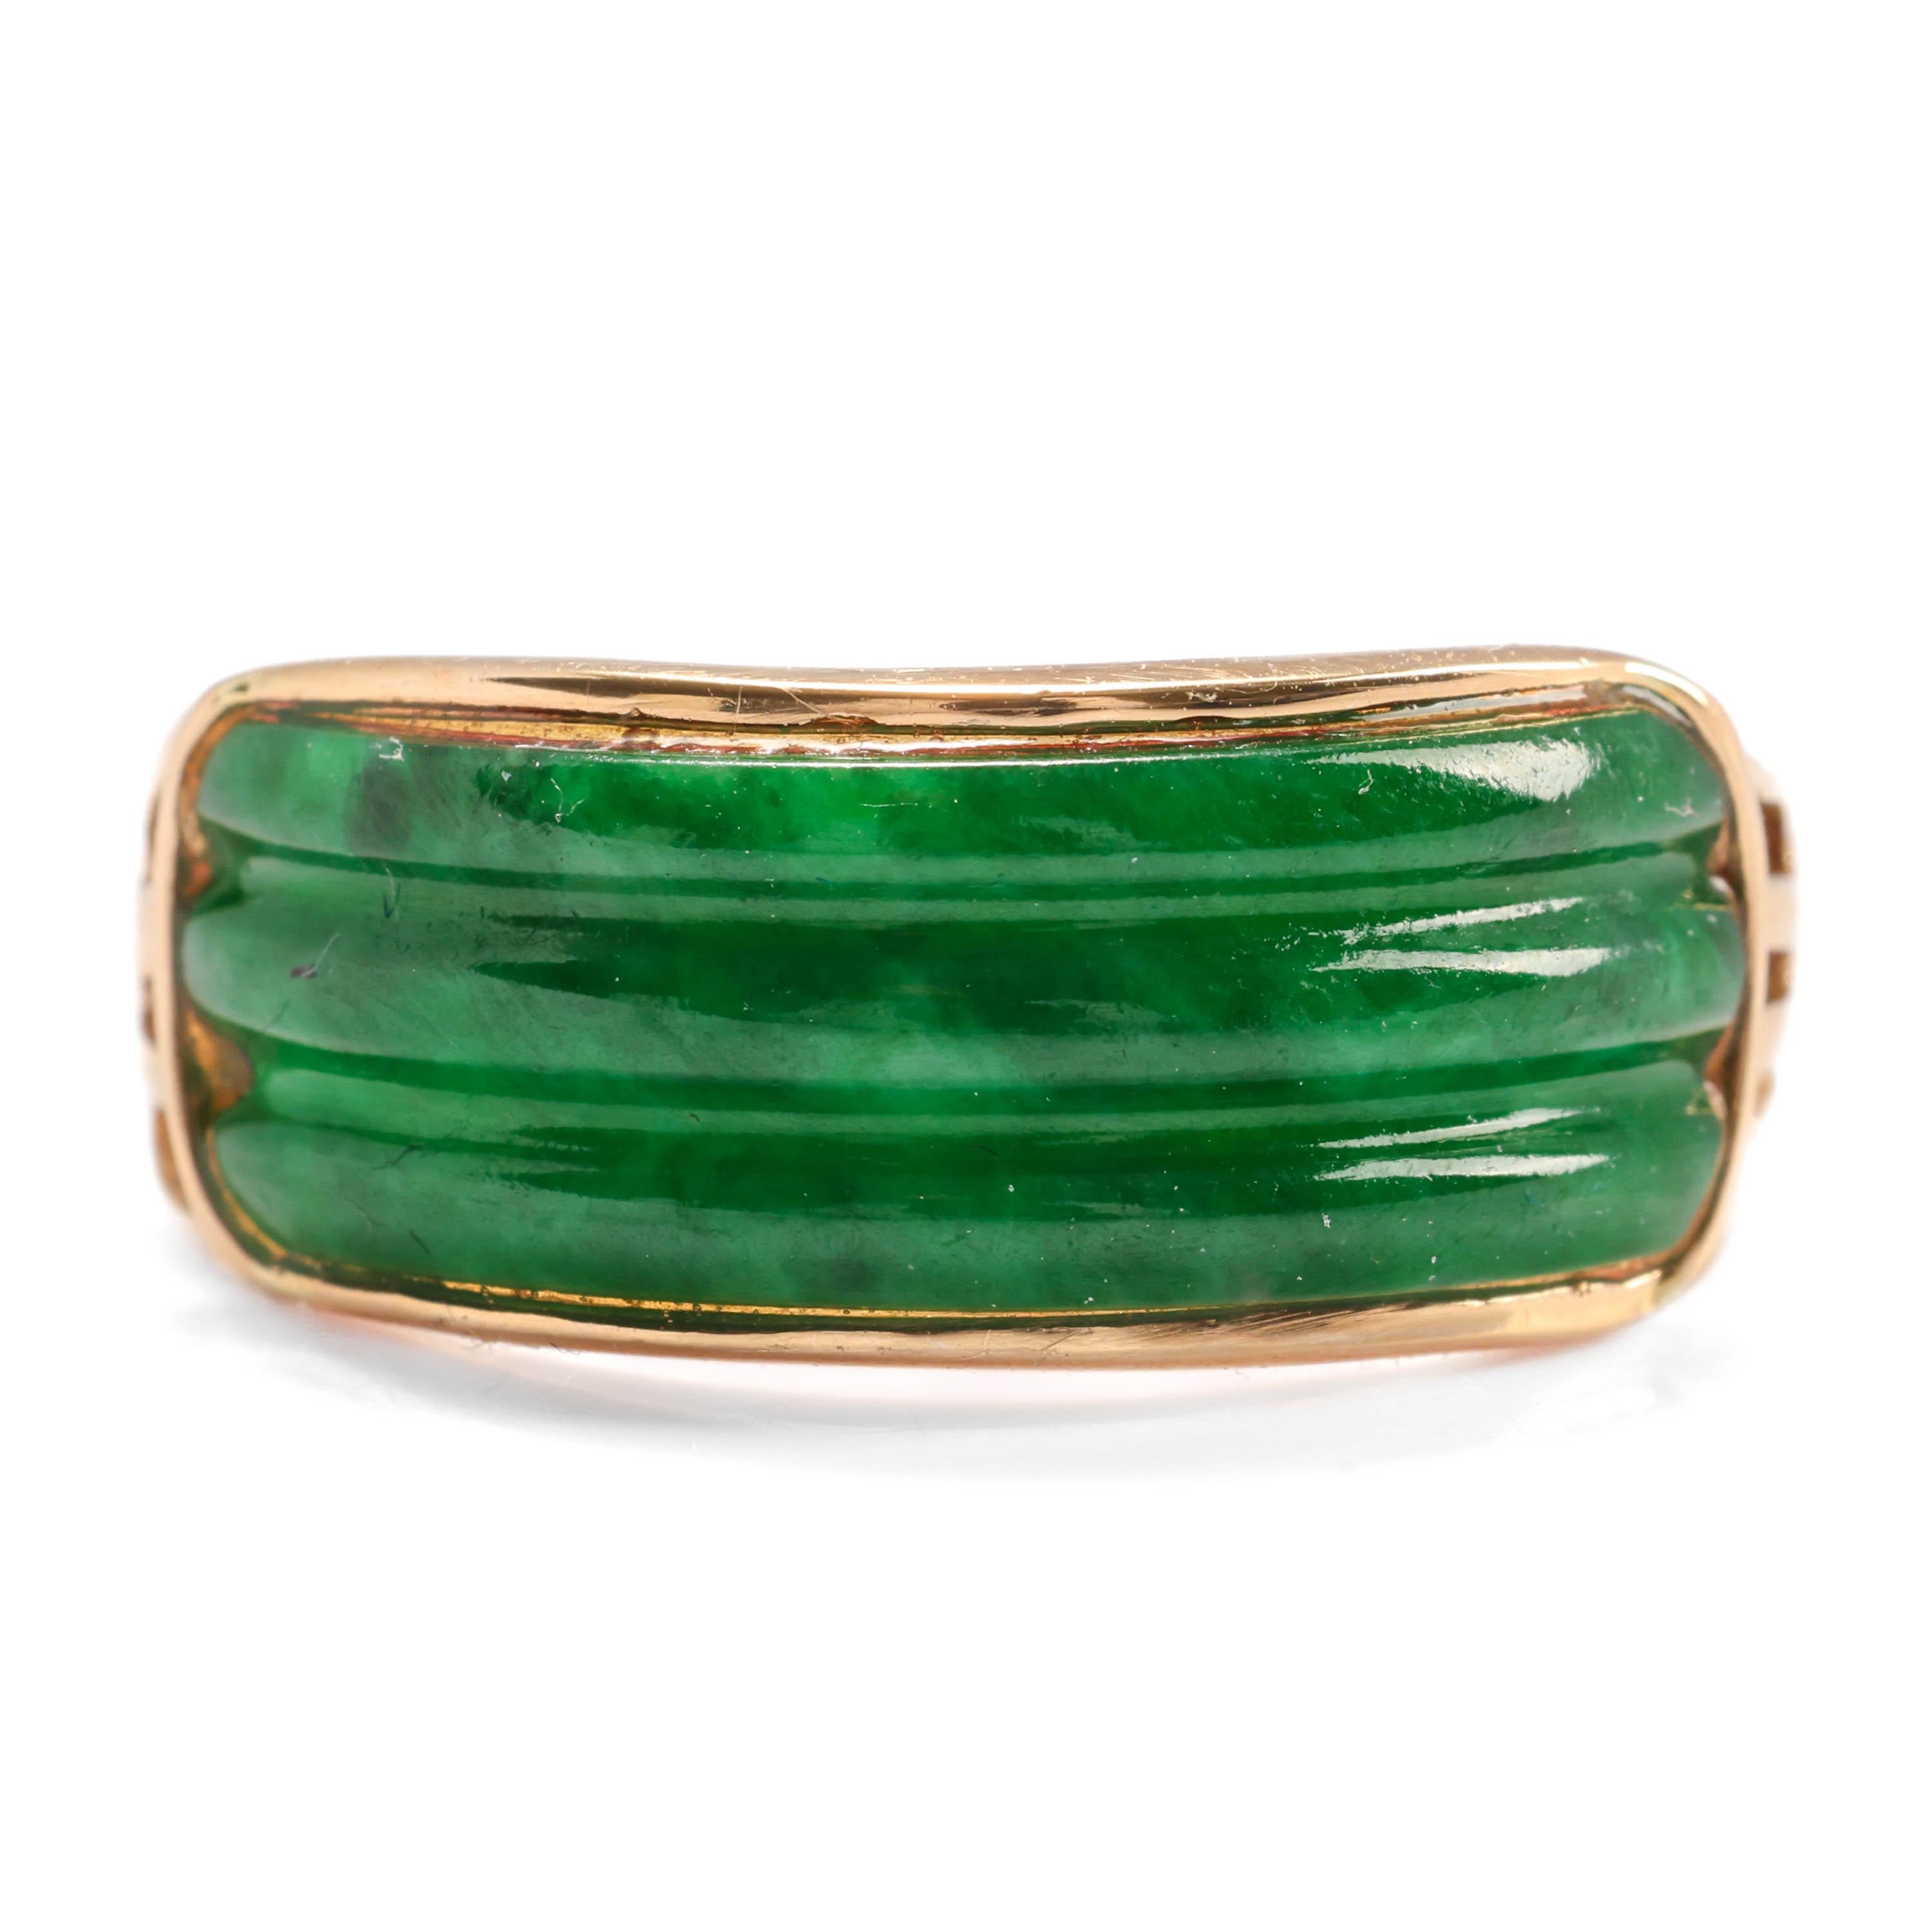 Such an unusual one-of-a-kind ring from the middle of the previous century (circa 1960s), this 14K yellow gold ring features a hand-carved, fluted cabochon of luscious, translucent deep emerald green jadeite jade fro Burma.

The jade measures